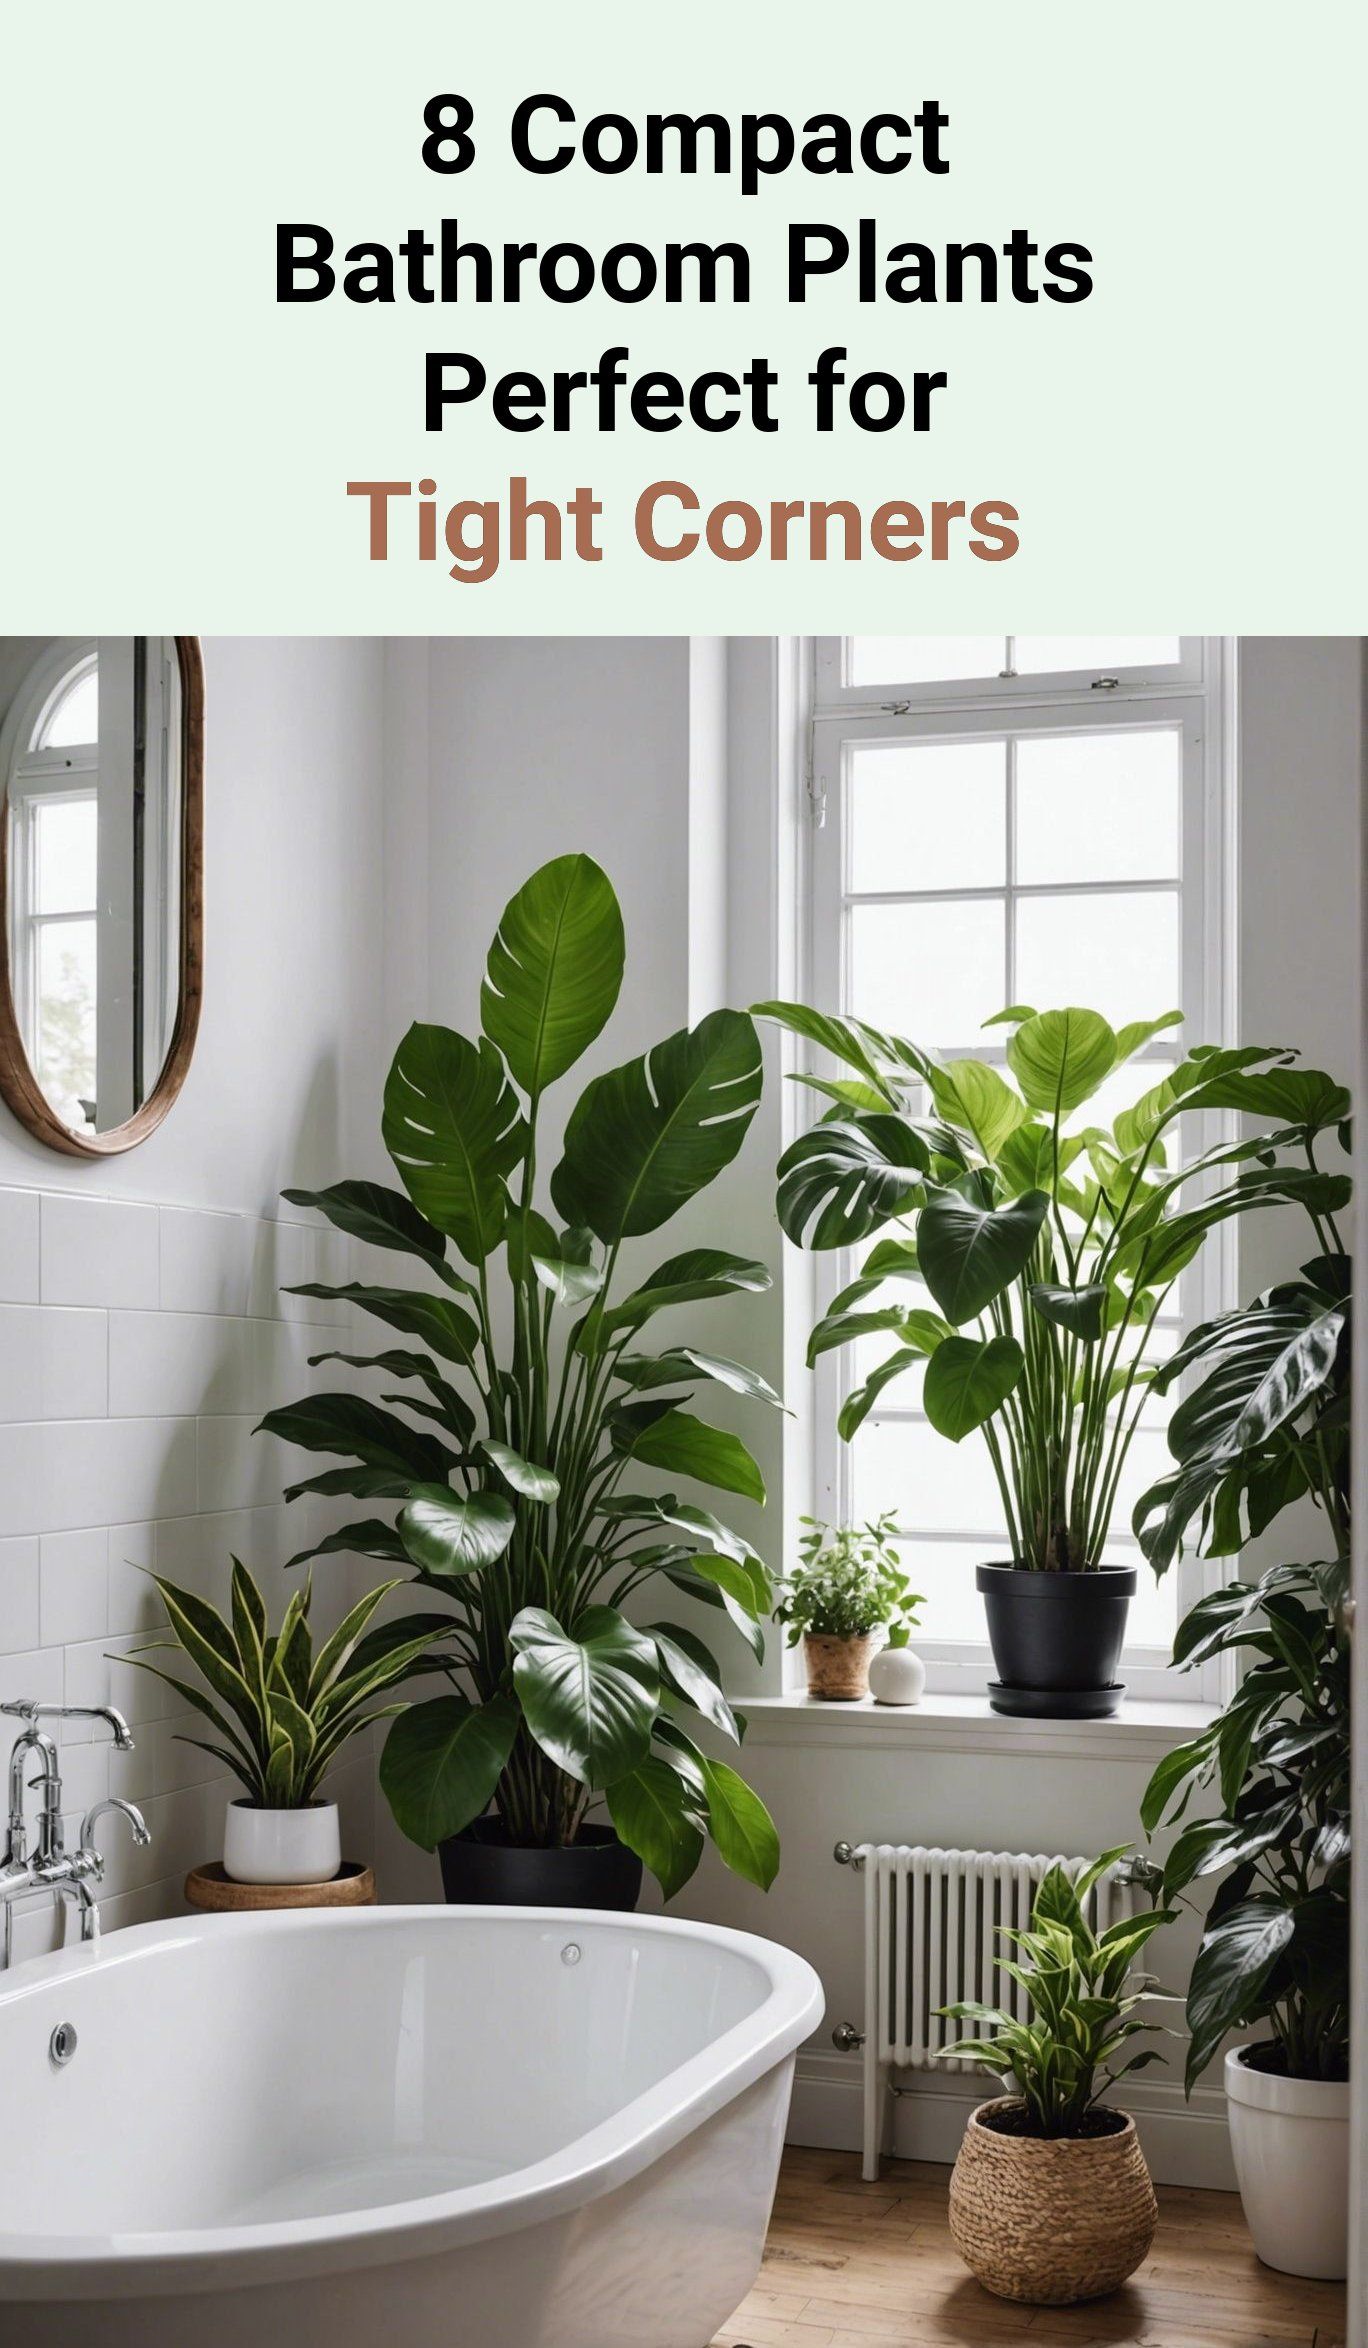 8 Compact Bathroom Plants Perfect for Tight Corners